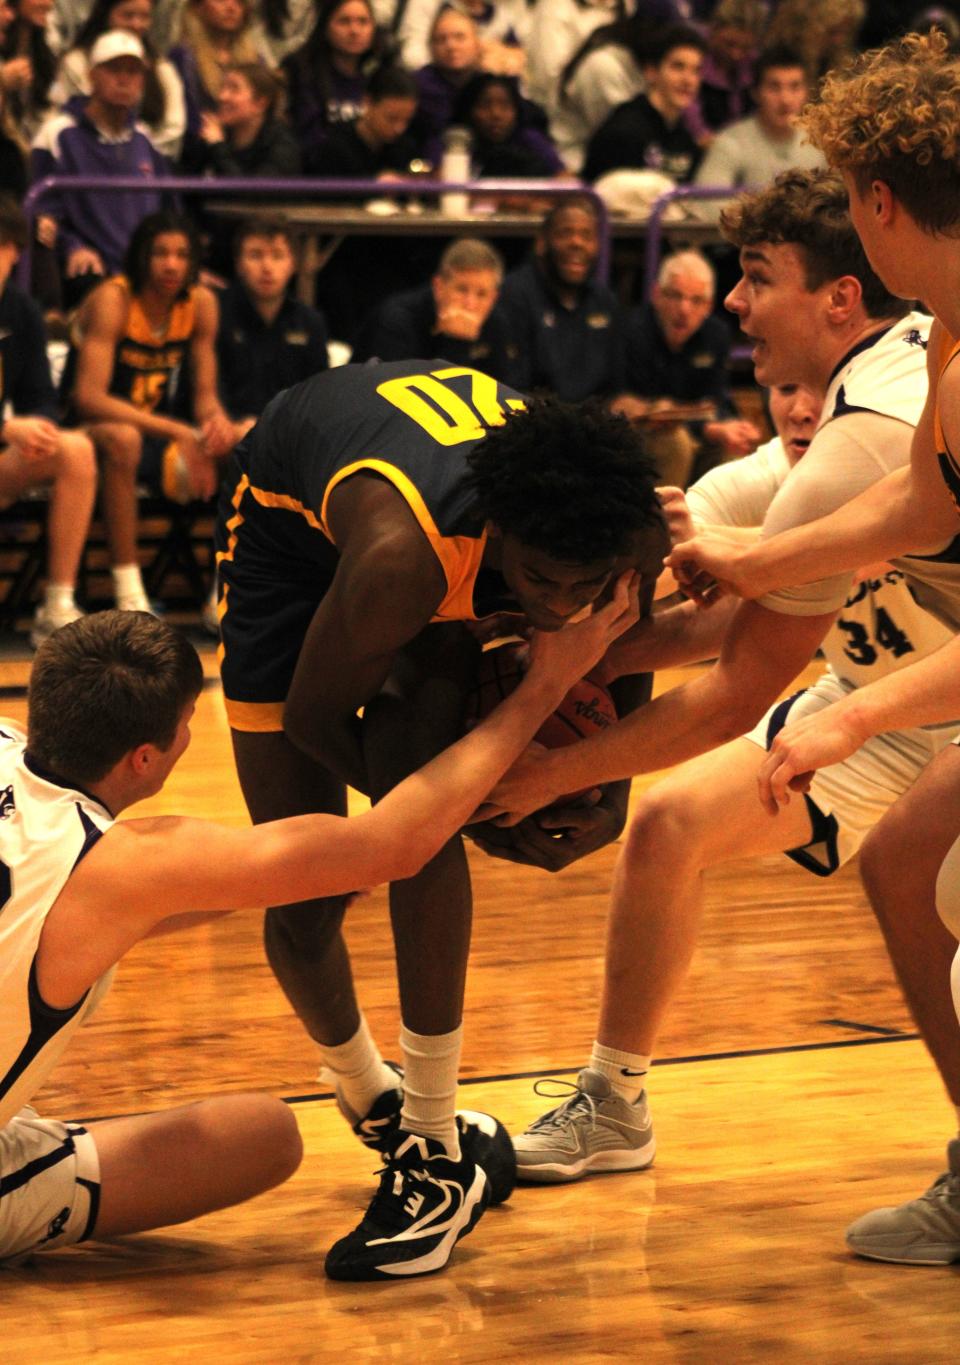 Moeller and Elder are battling for position in the top 10 of the Division I AP poll. Moeller won 44-28 Feb. 2.